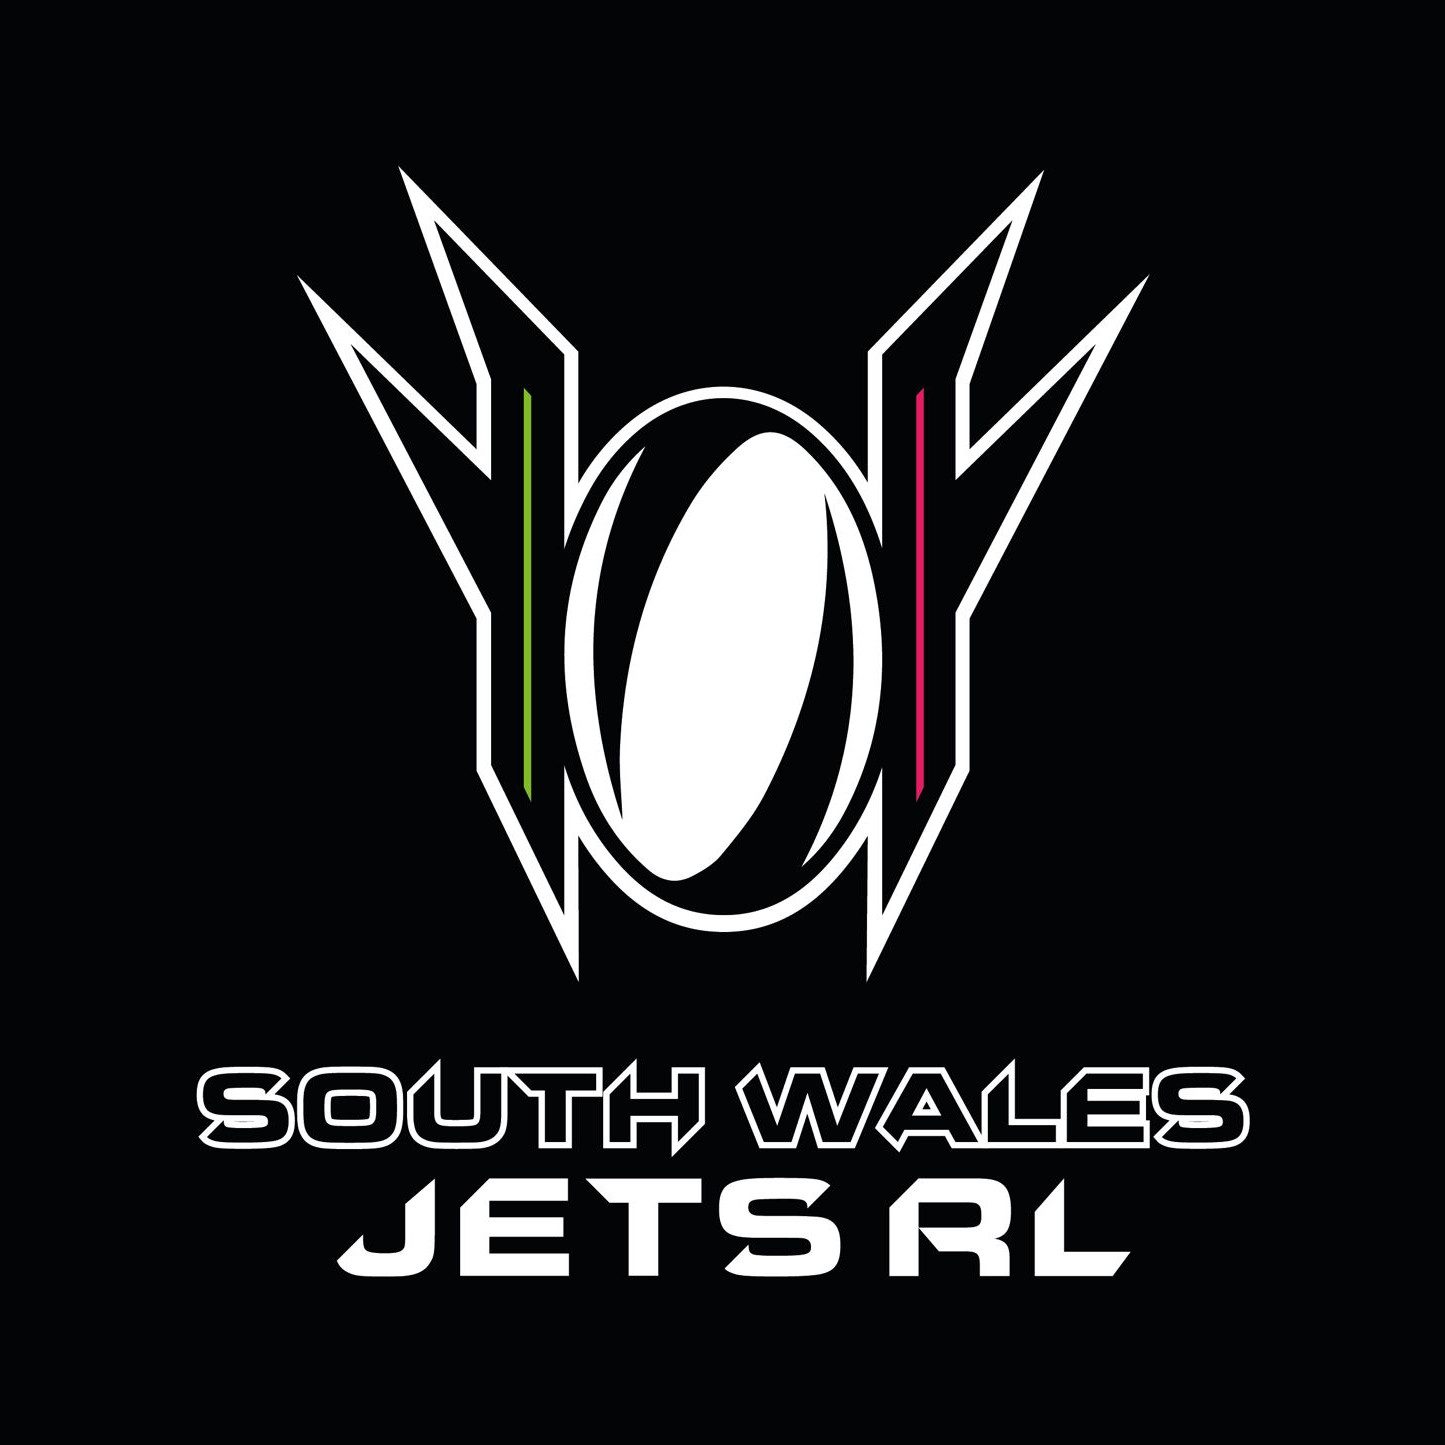 South Wales Jets